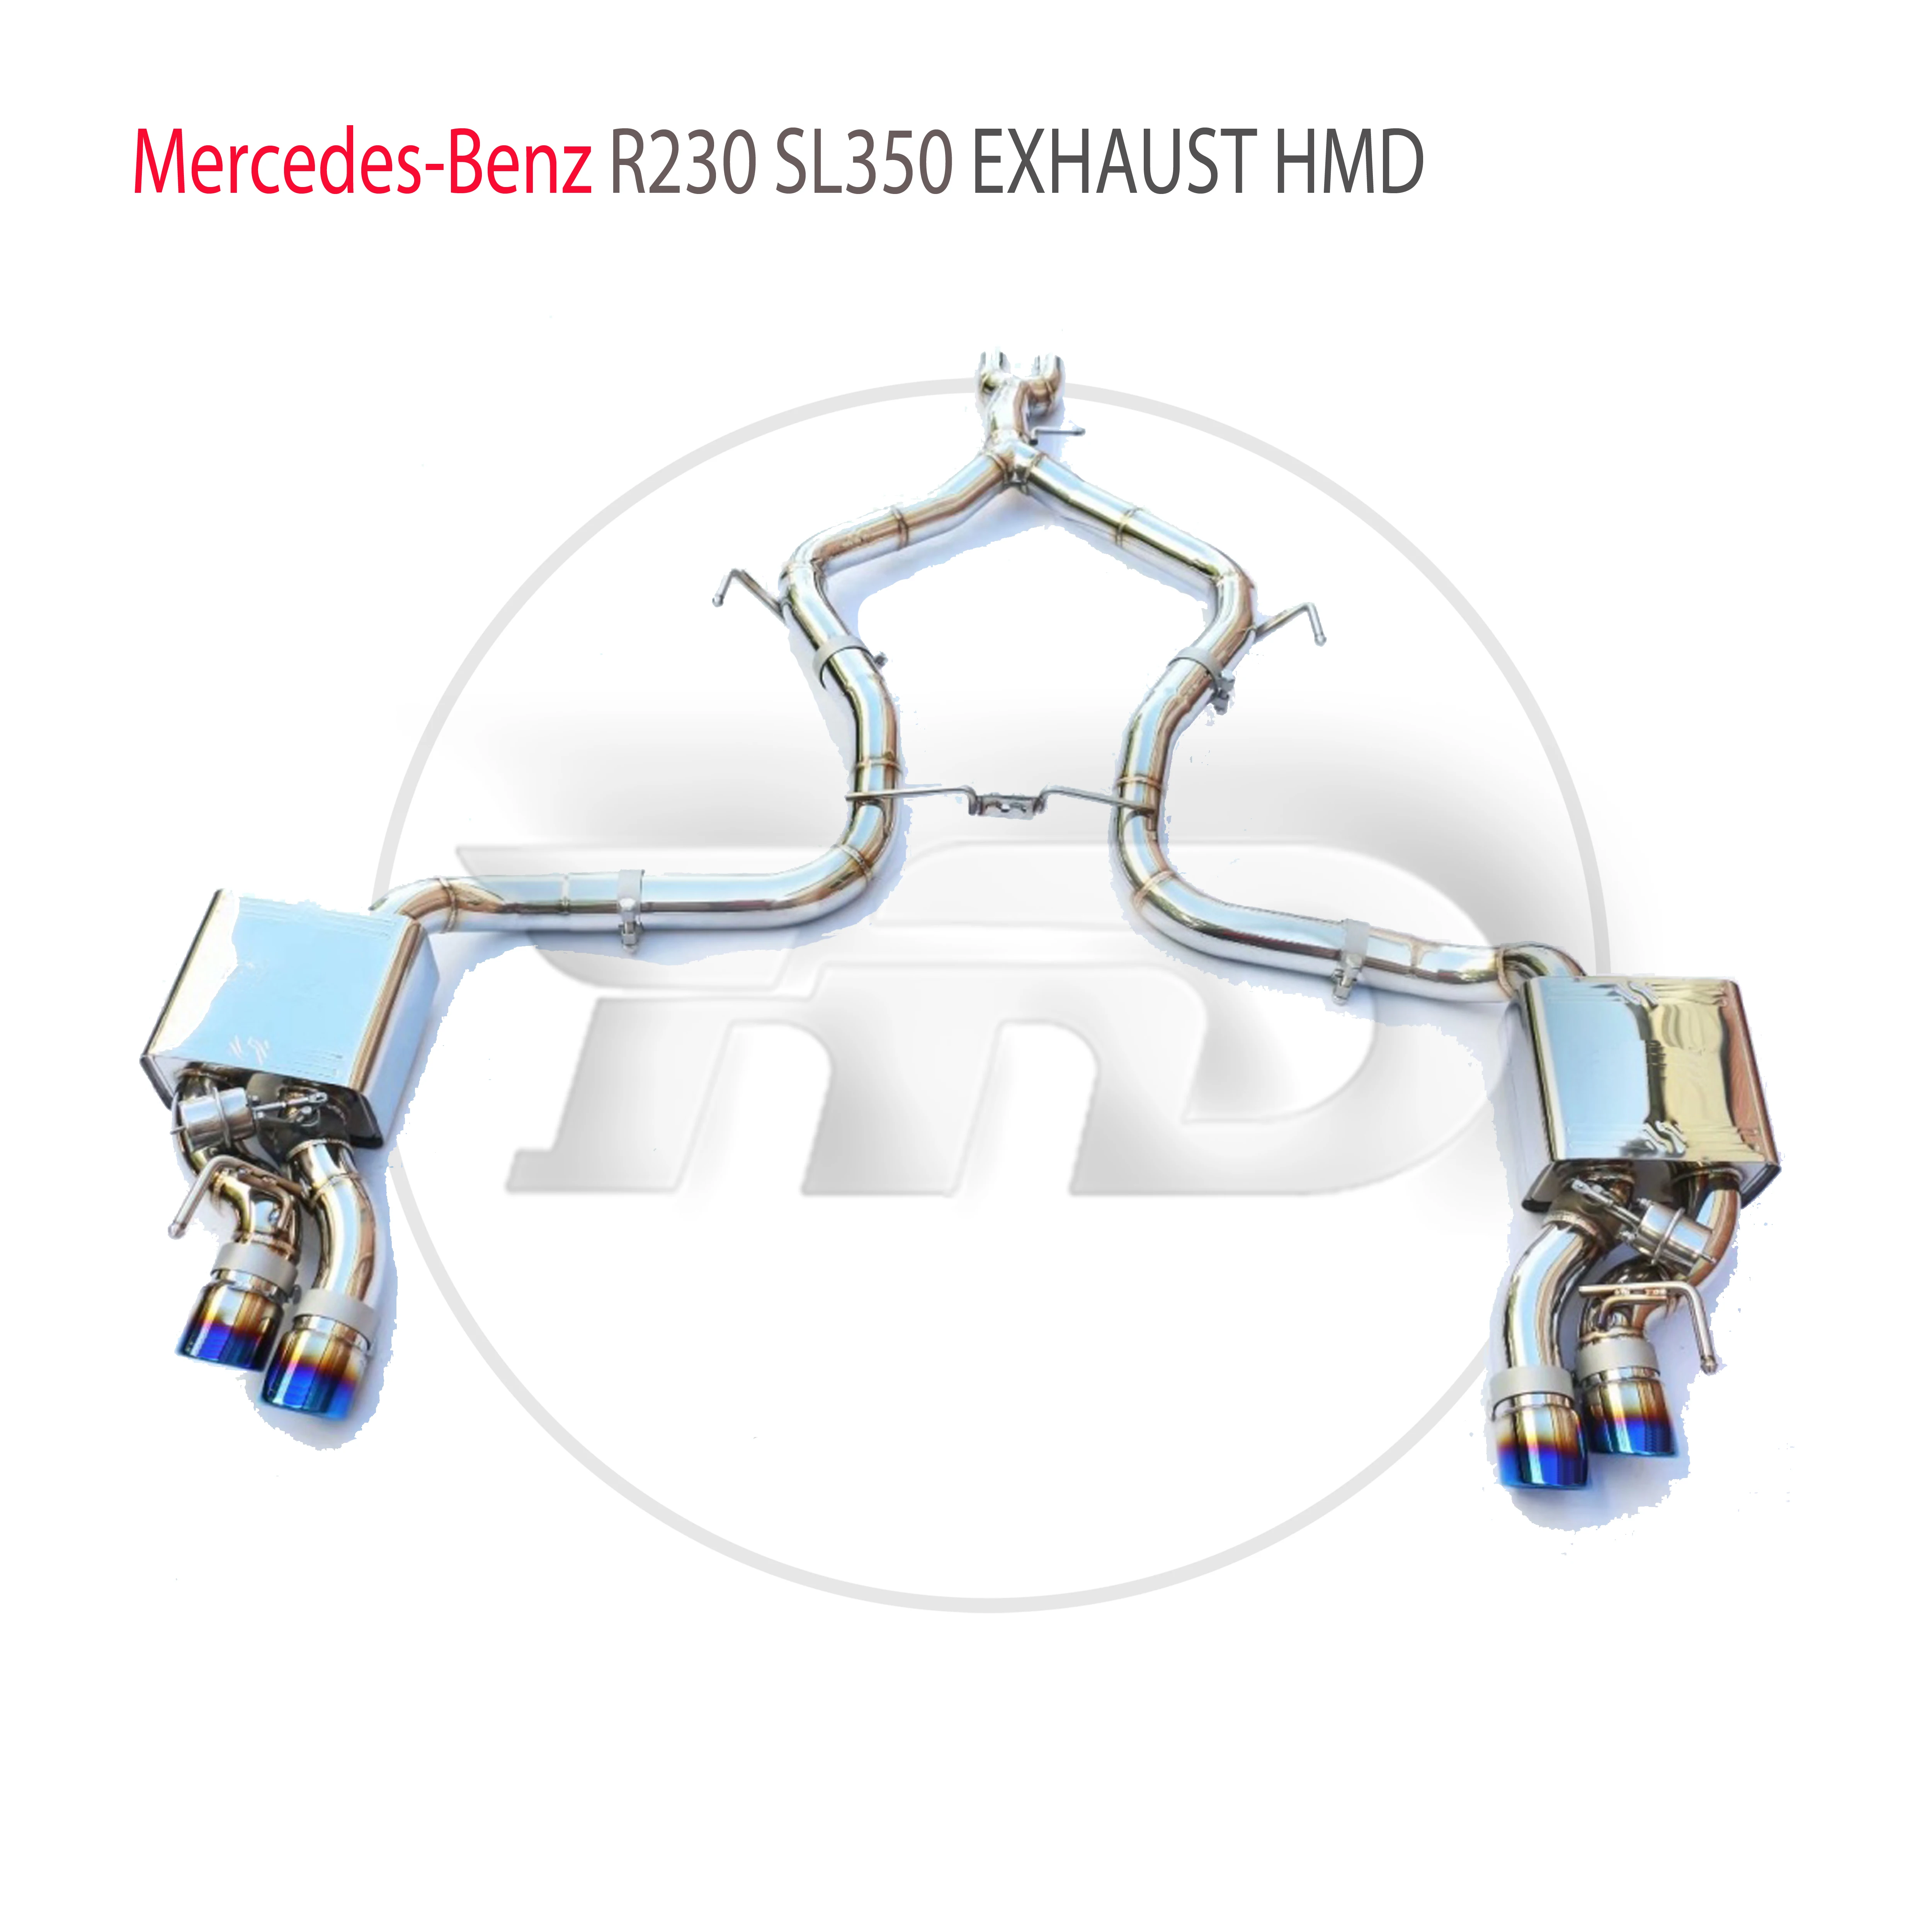 

HMD Stainless Steel Exhaust System Performance Catback is Suitable for Mercedes Benz R230 SL350 SL500 Car Muffler